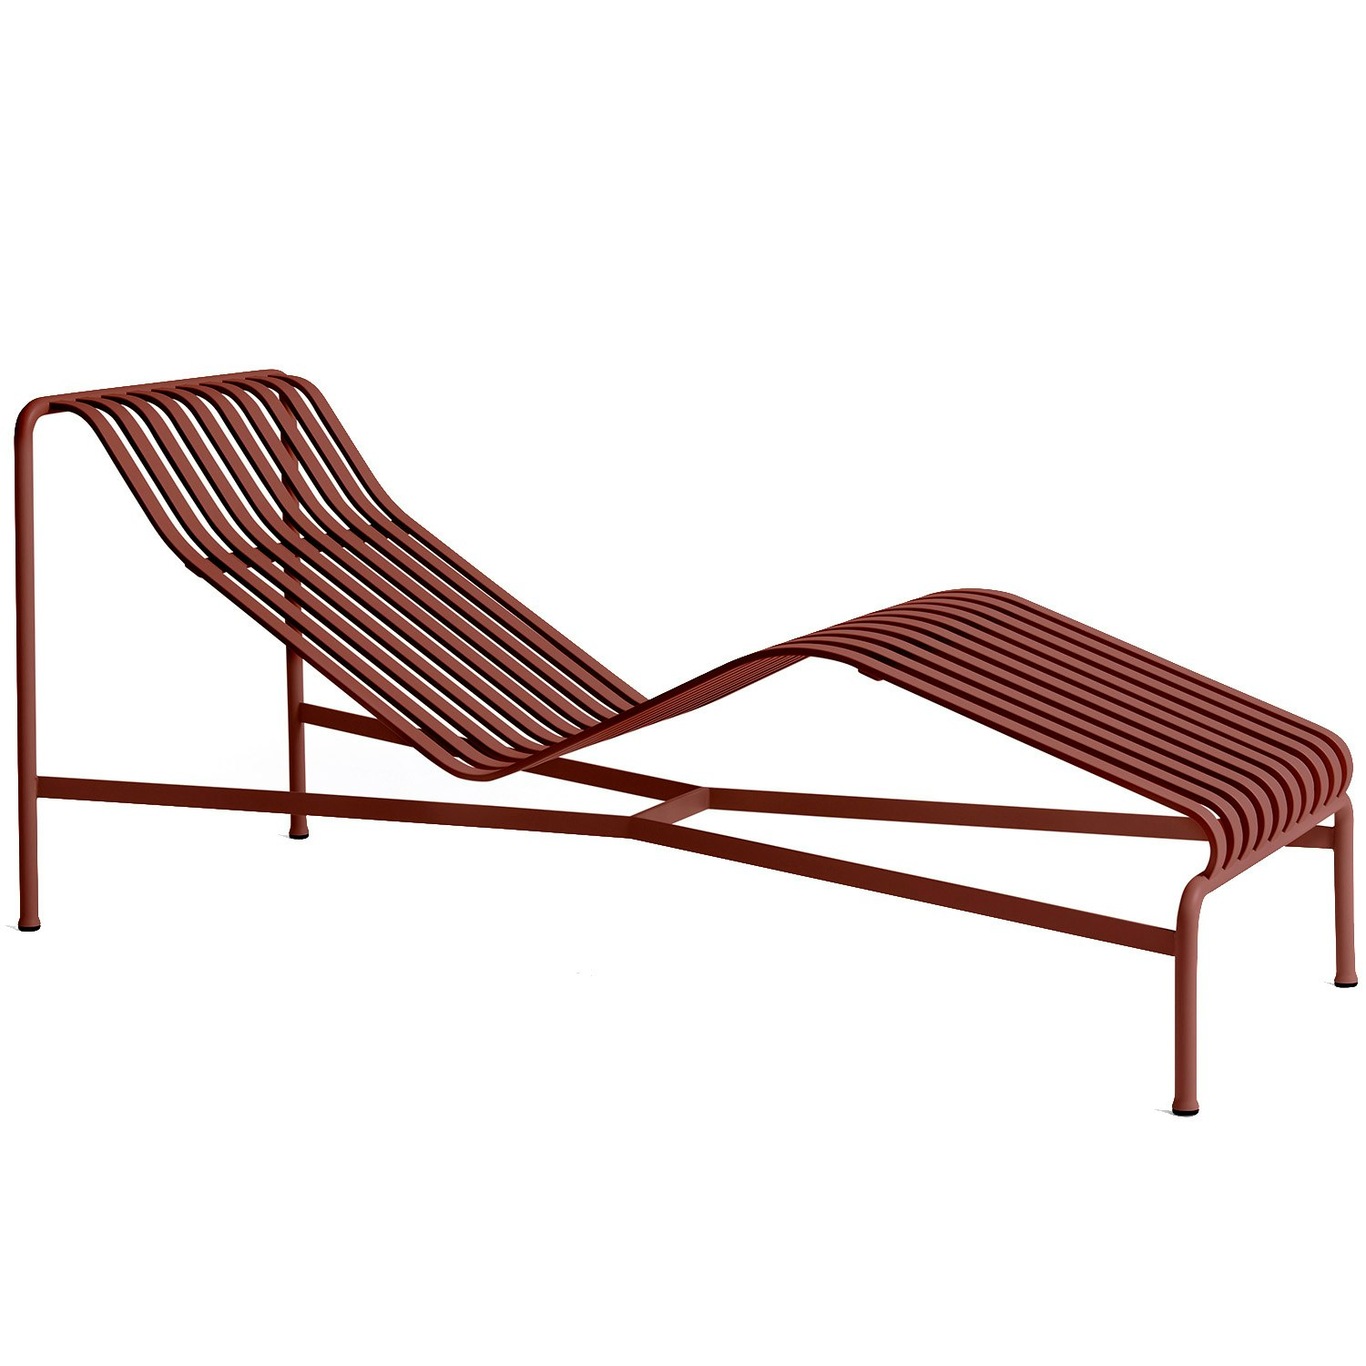 Palissade Chaise Longue, Iron Red